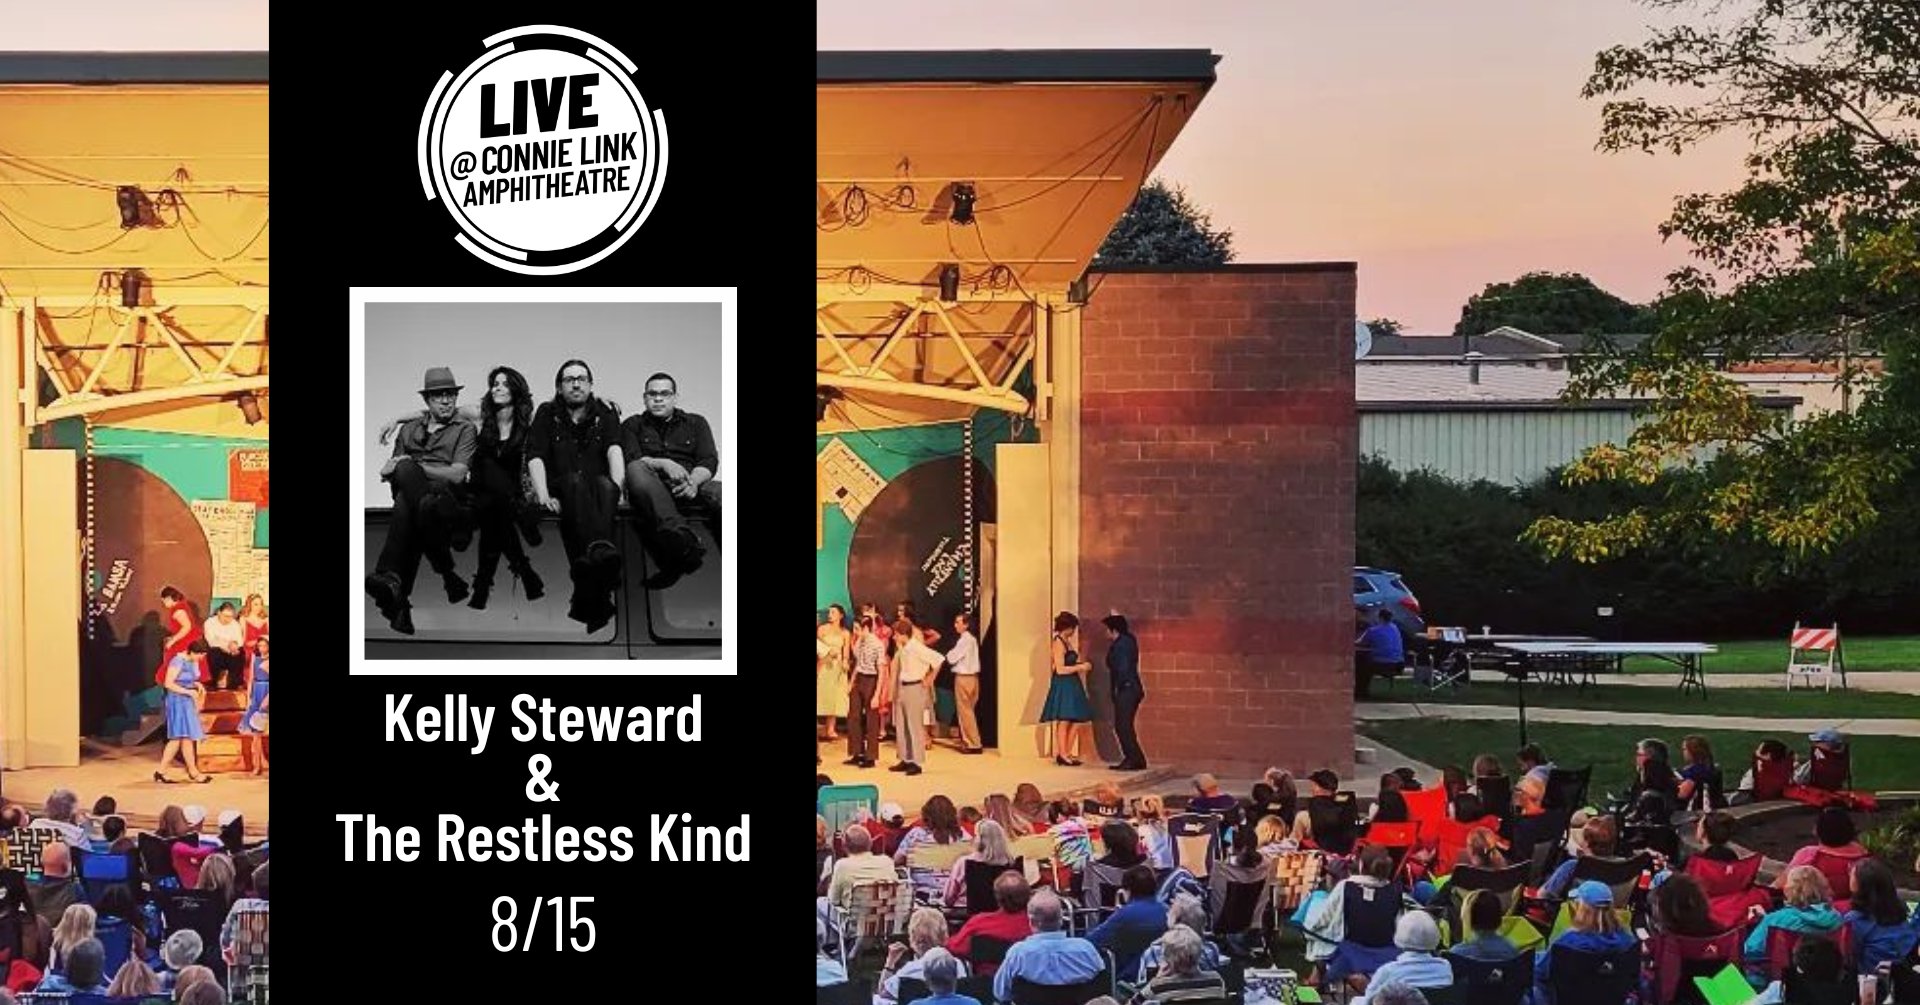 Normal LIVE presents Kelly Steward & The Restless Kind @ Connie Link Amphitheatre